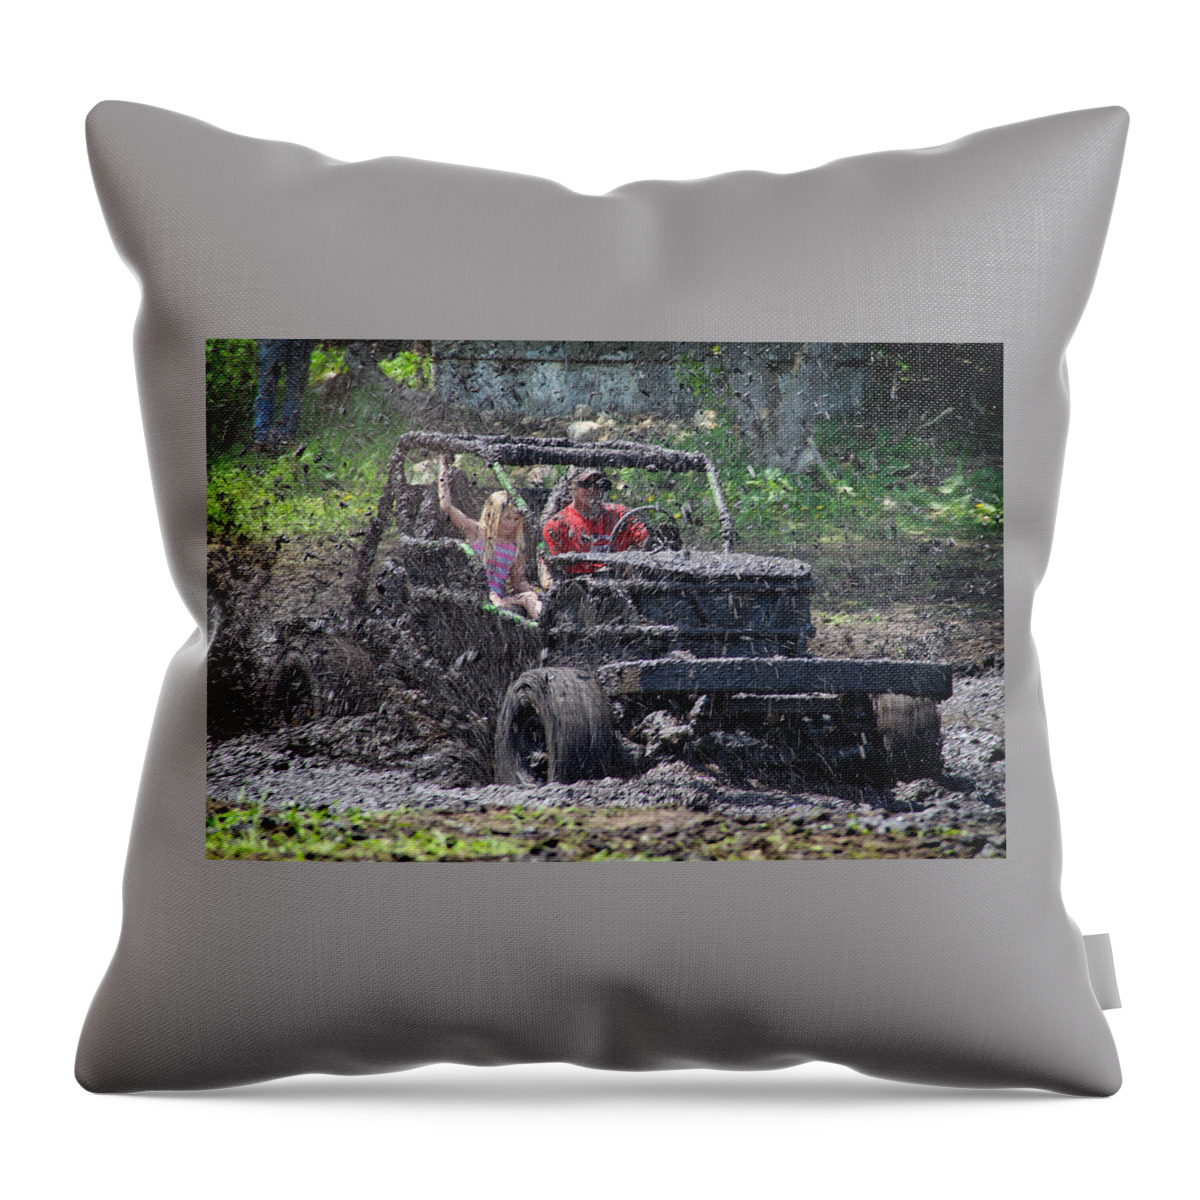 Mud Throw Pillow featuring the photograph Mud Bogging by Mary Lee Dereske